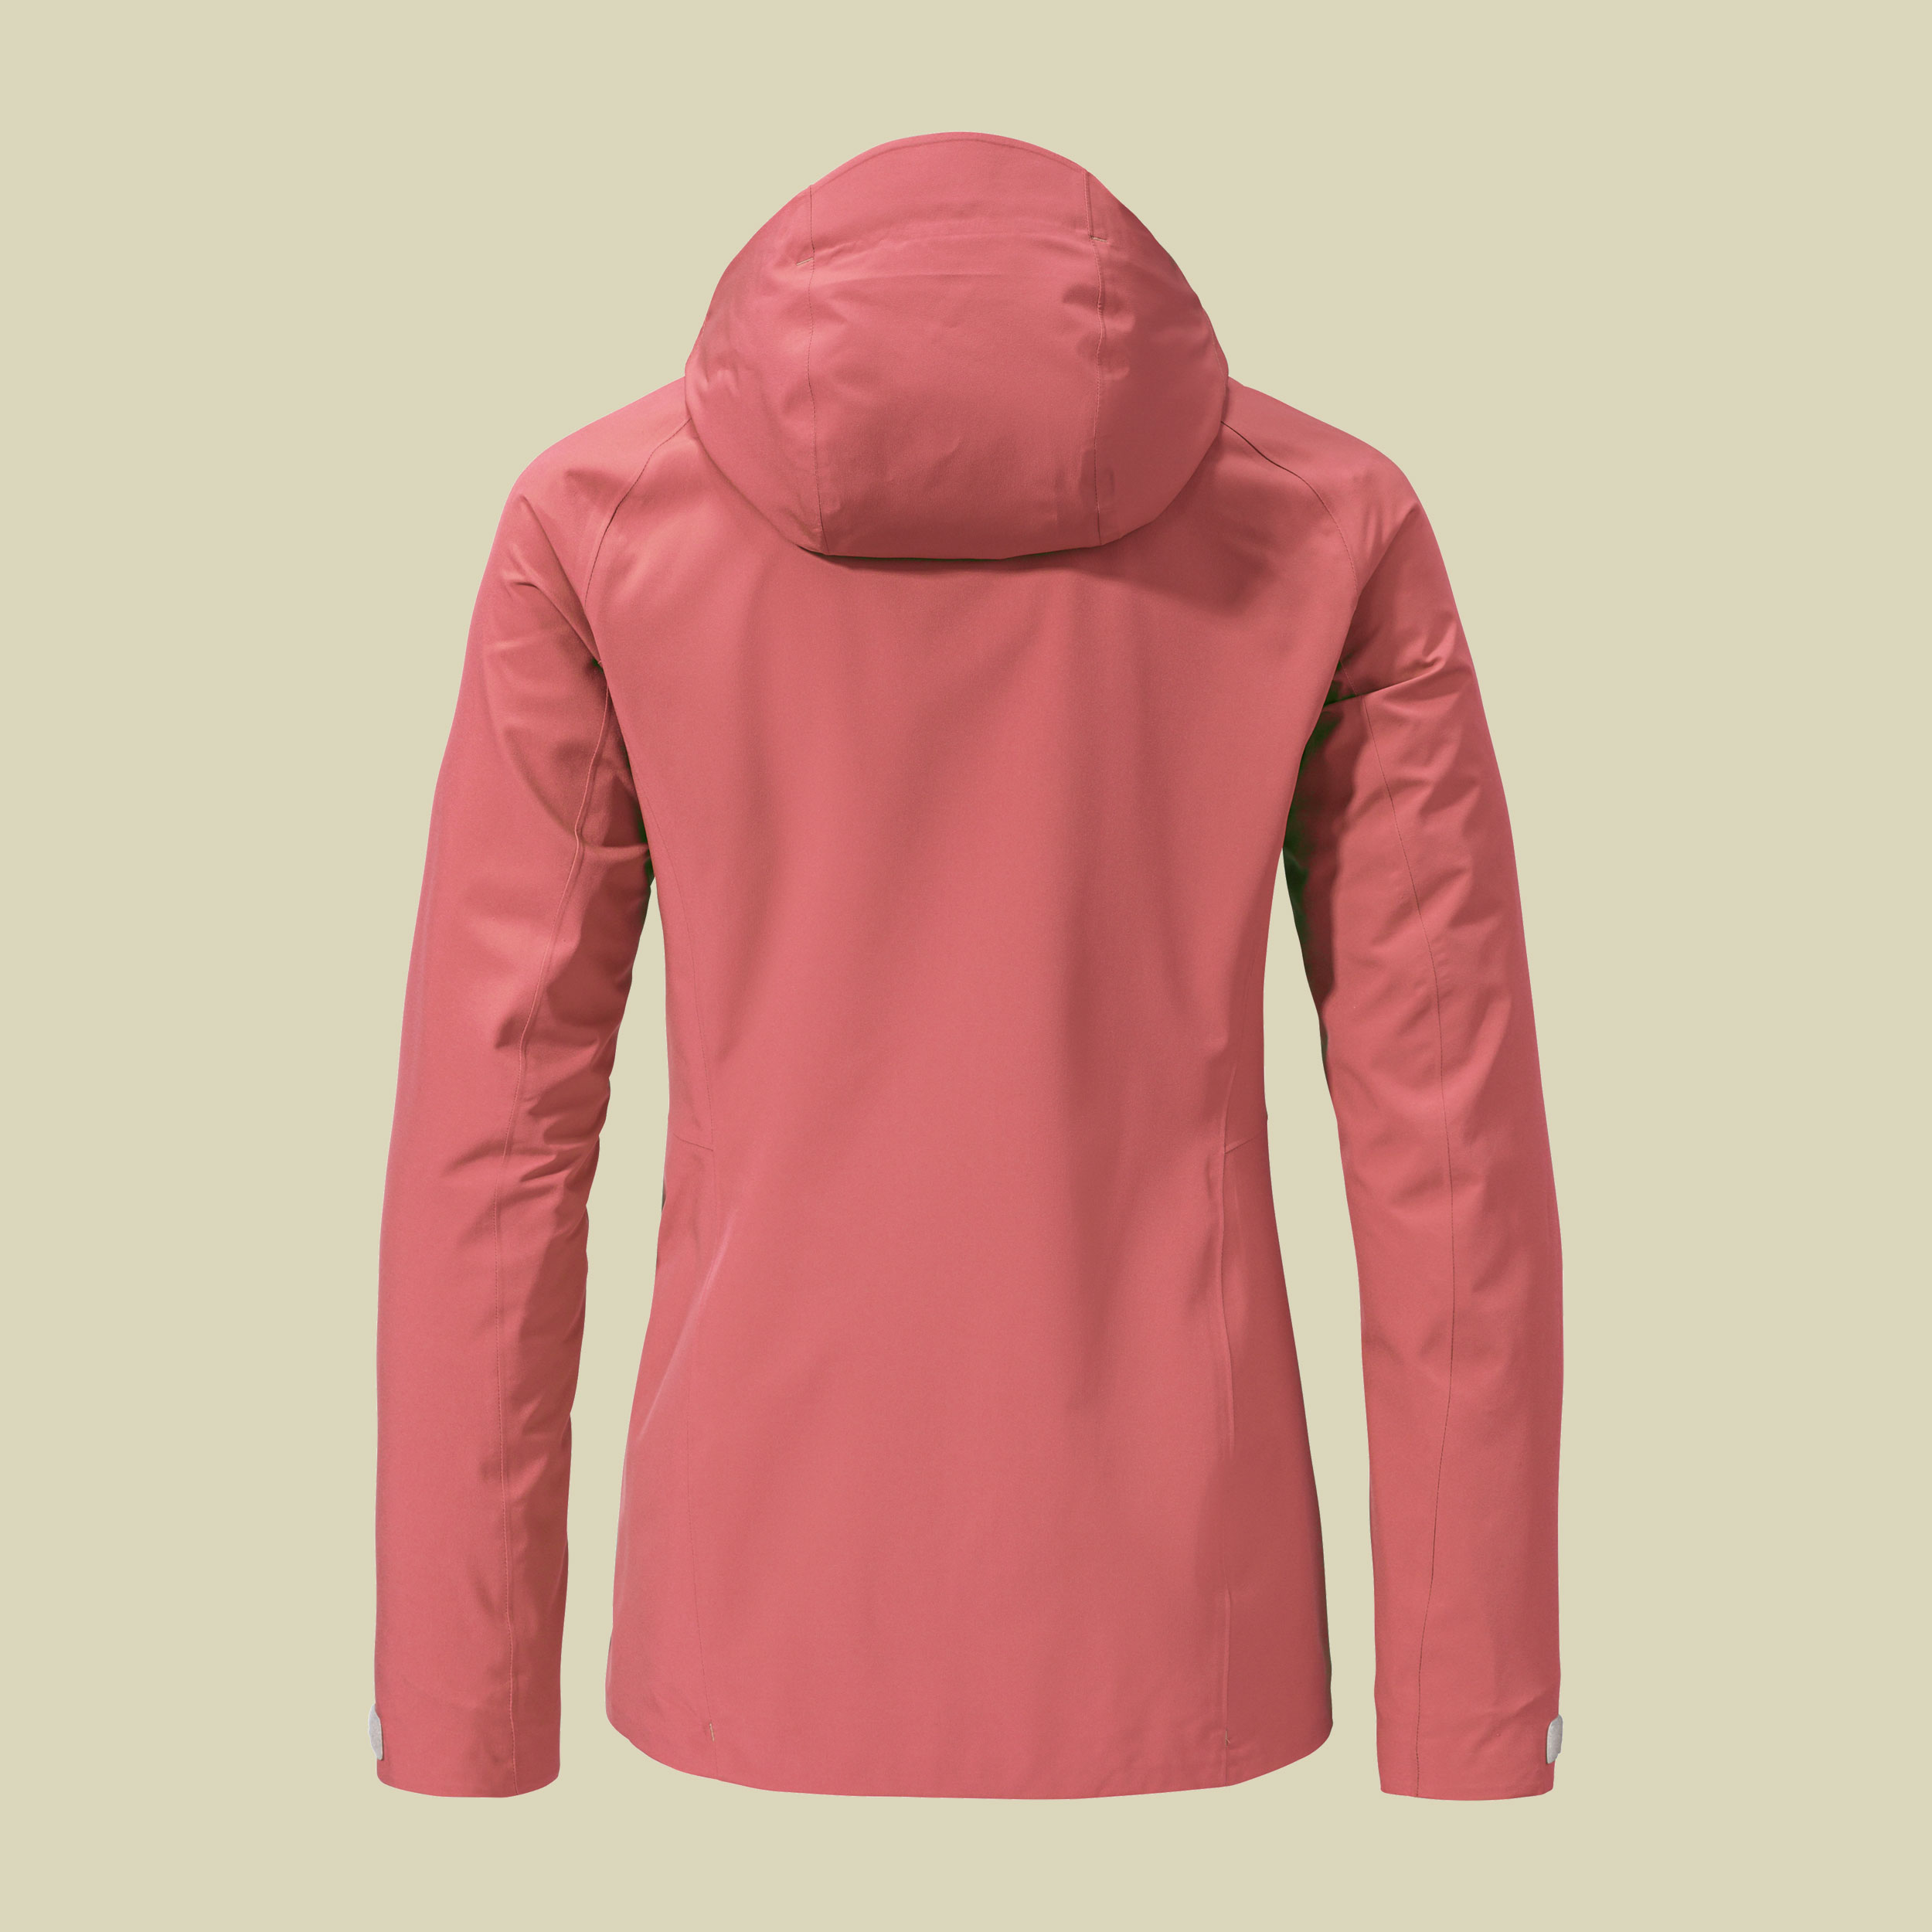 2L Jacket Ankelspitz L Women 36 pink - clasping rose